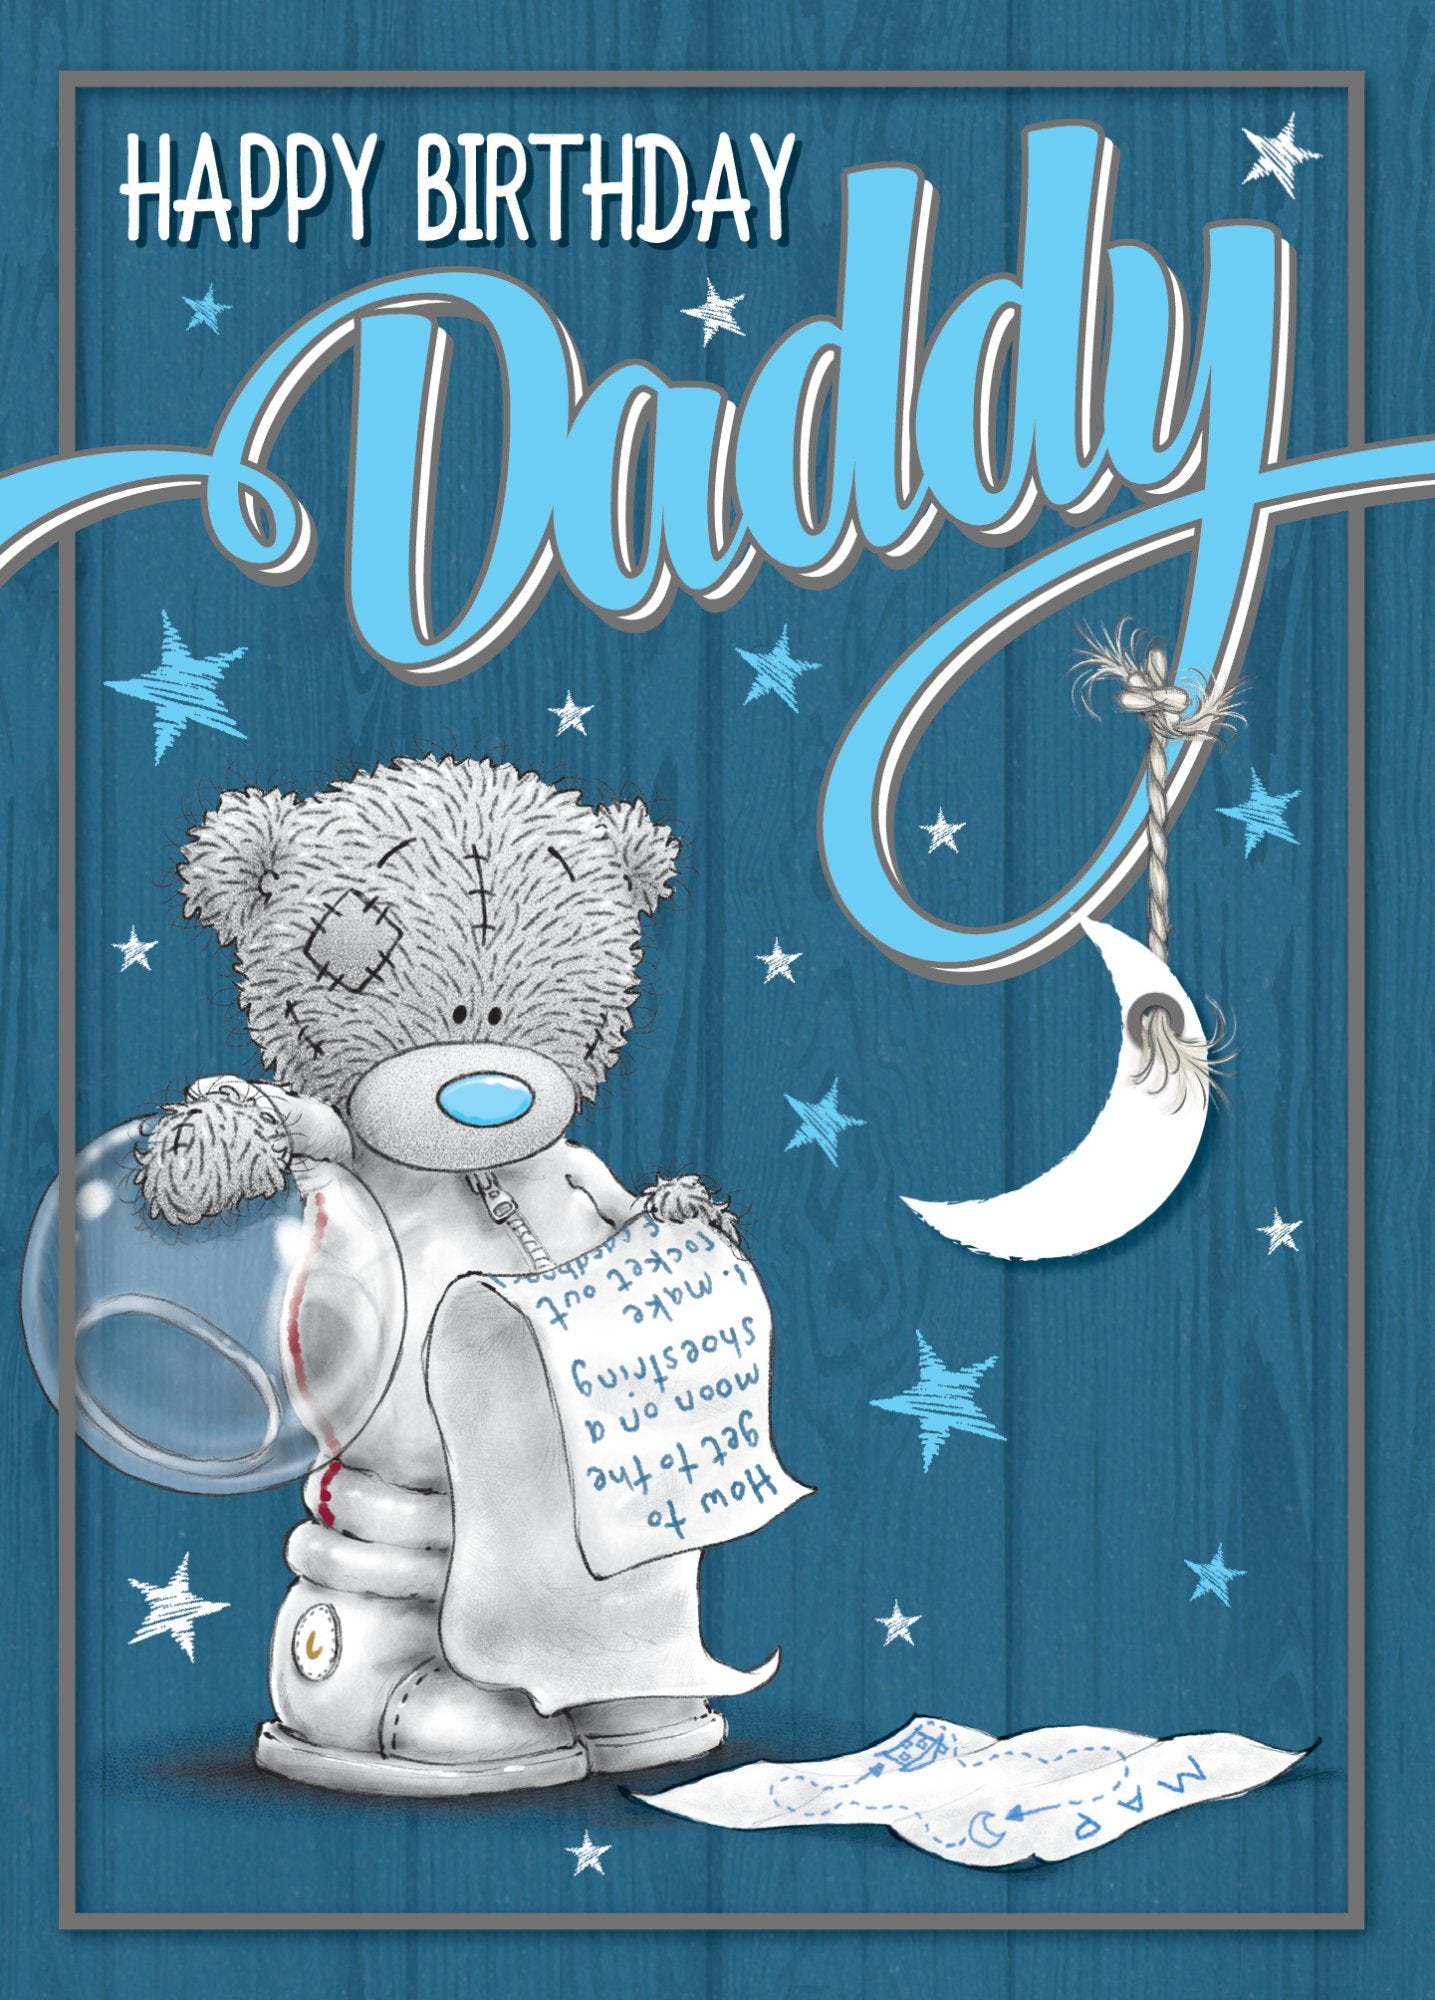 Photograph of Daddy Birthday Teddy Astronaut Greetings Card at Nicole's Shop